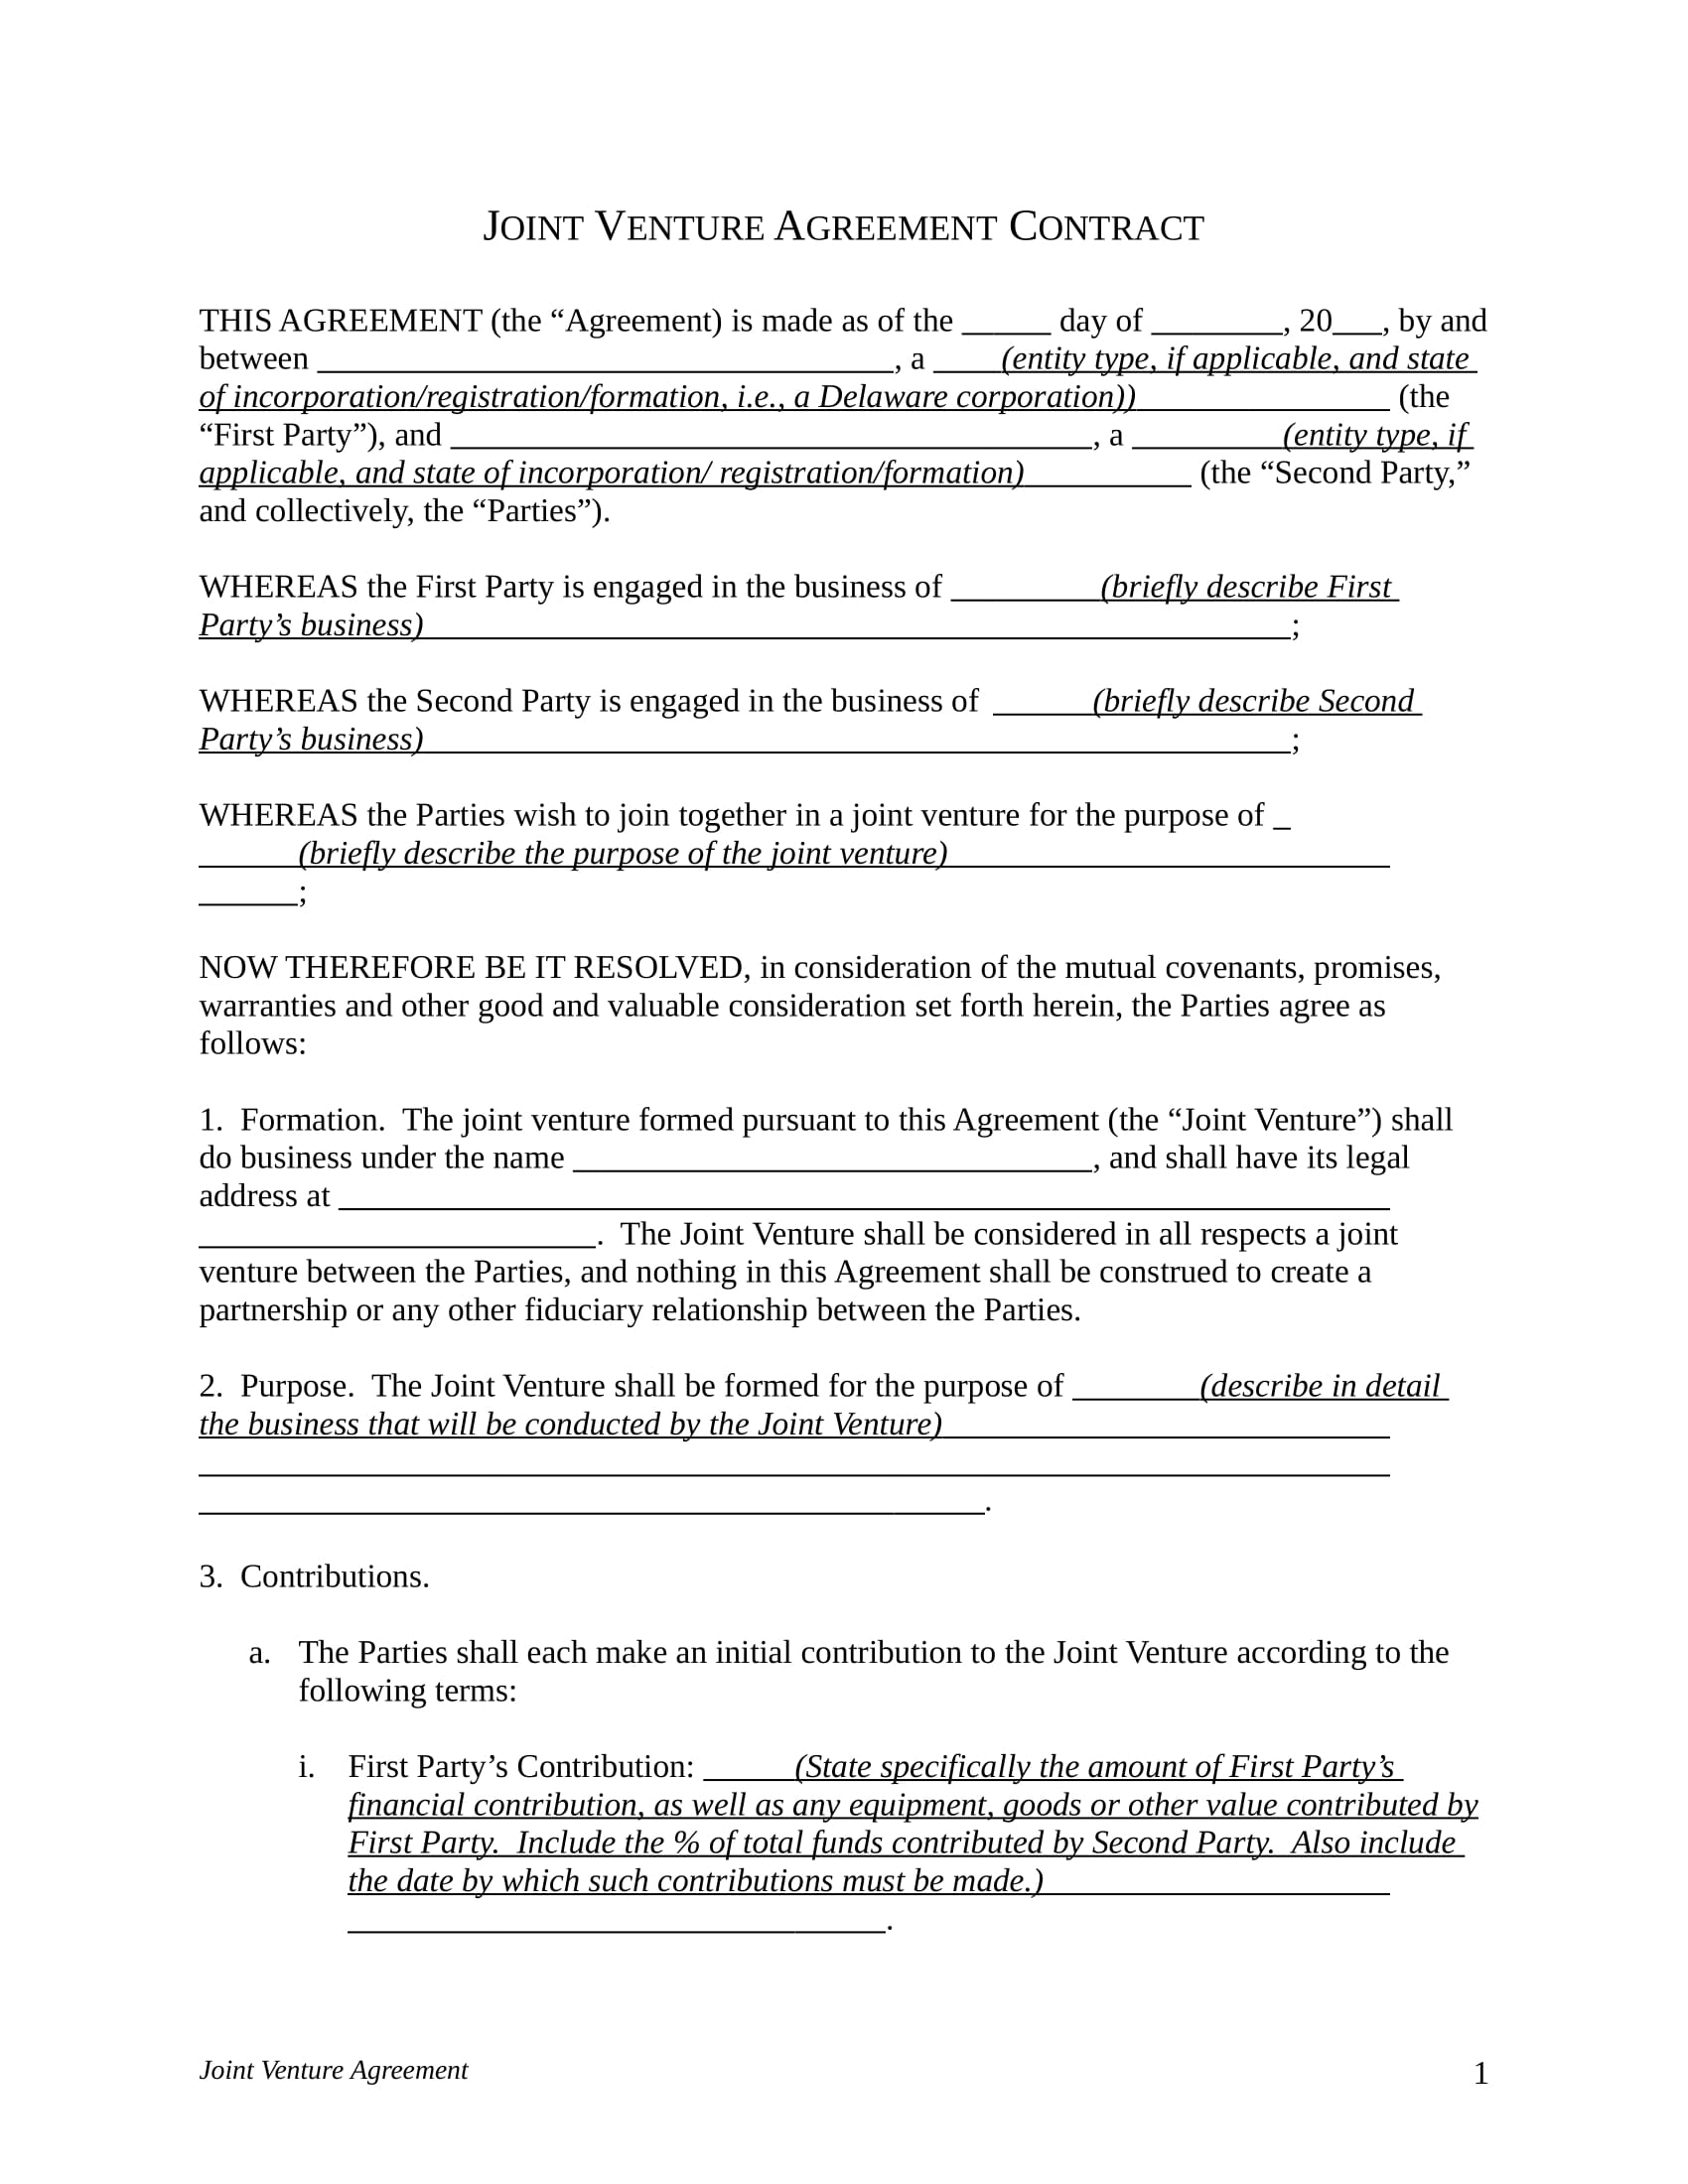 Joint Venture Contract Template from images.sampleforms.com